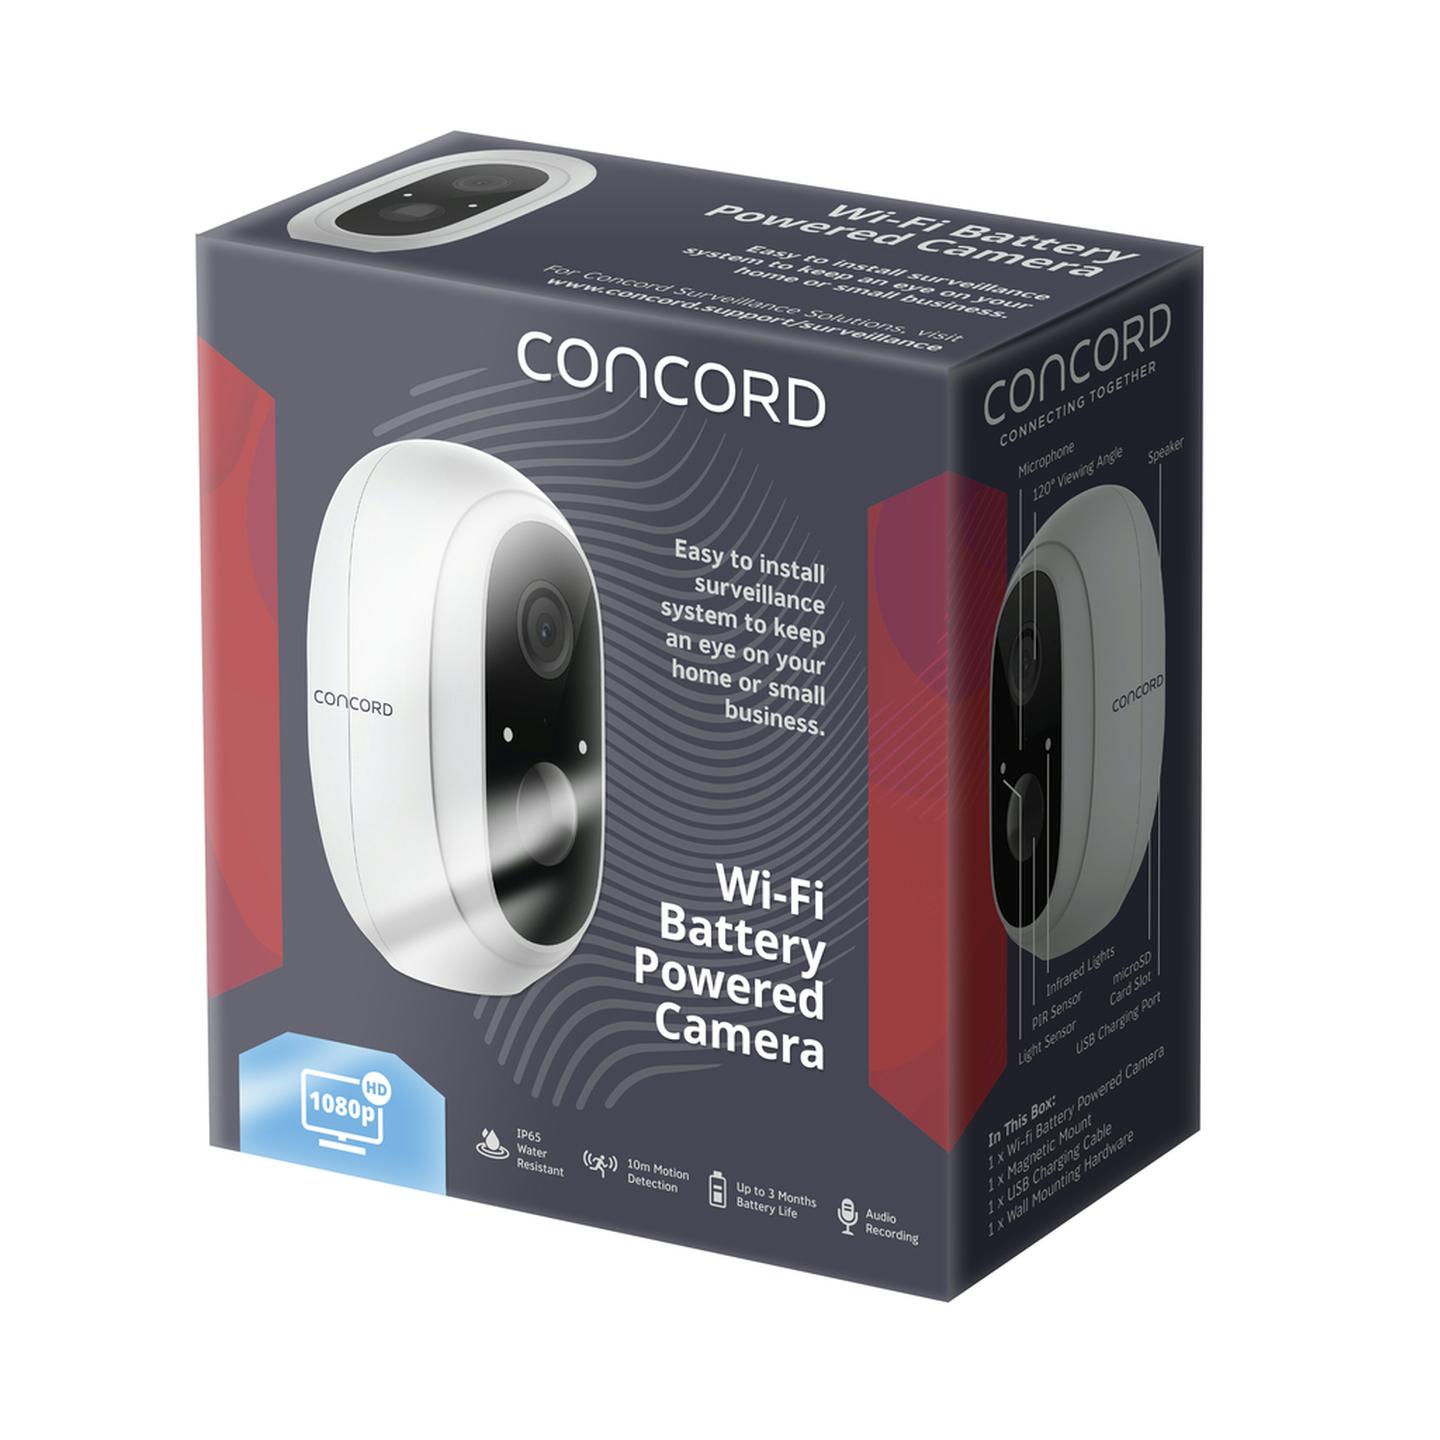 Concord Wi-Fi Battery Powered Camera